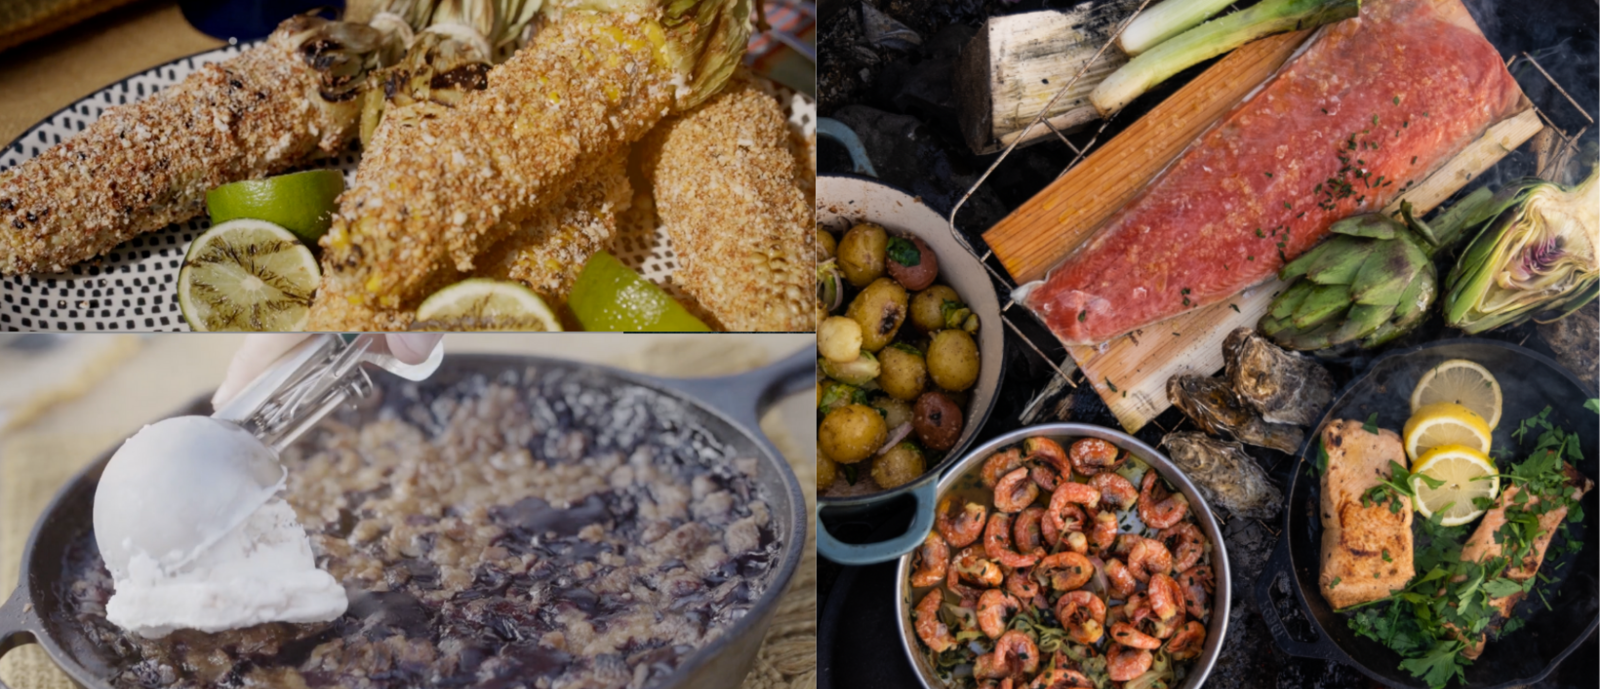 10 Delicious Crockpot Meals Perfect for RV Camping